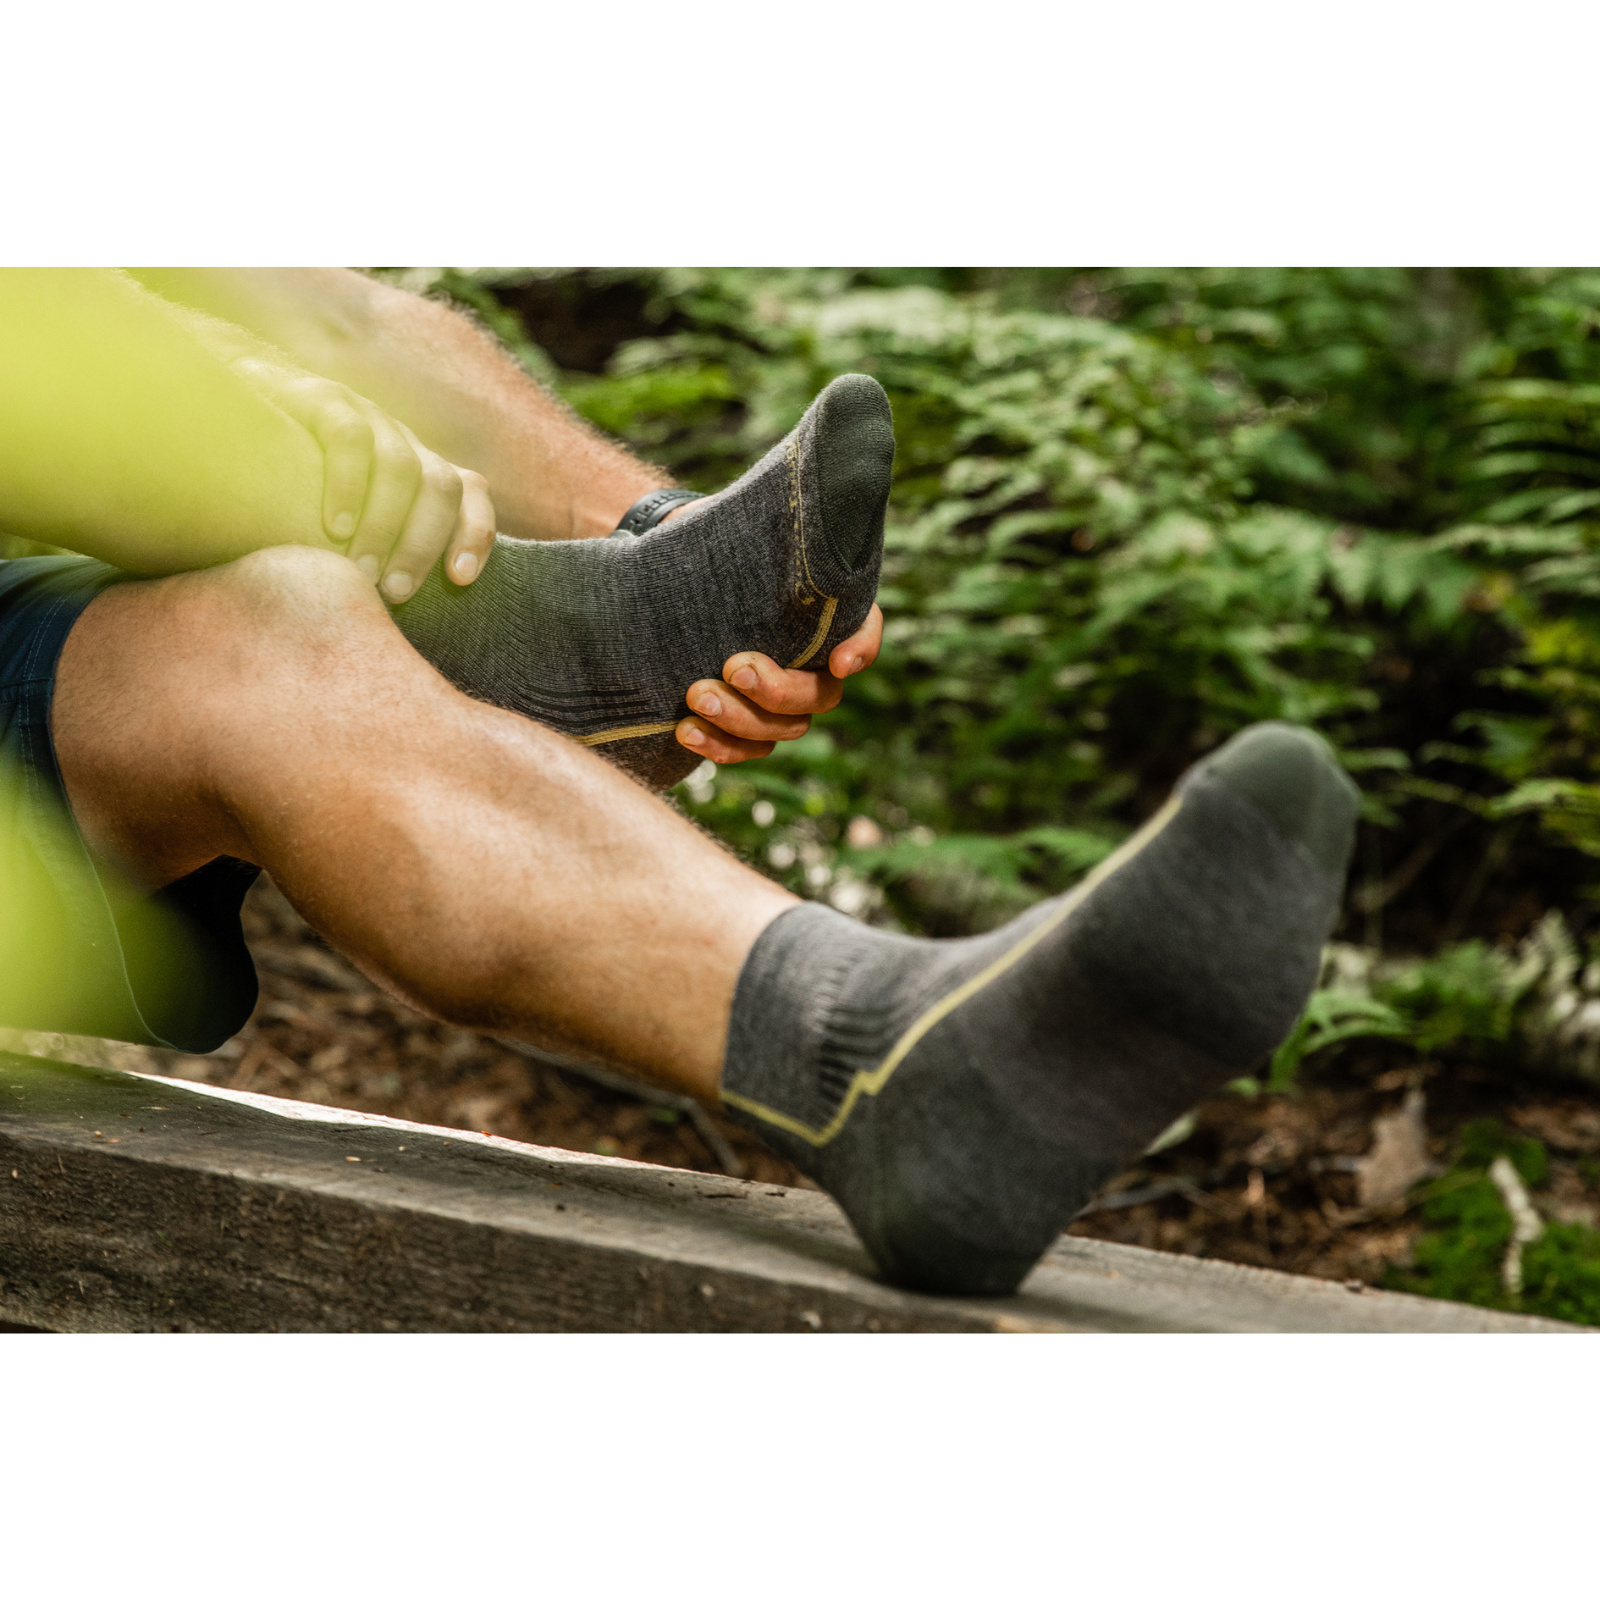 Darn Tough 1959 Quarter Height Midweight with Cushion Hike Men's Sock in taupe worn by model in the forest